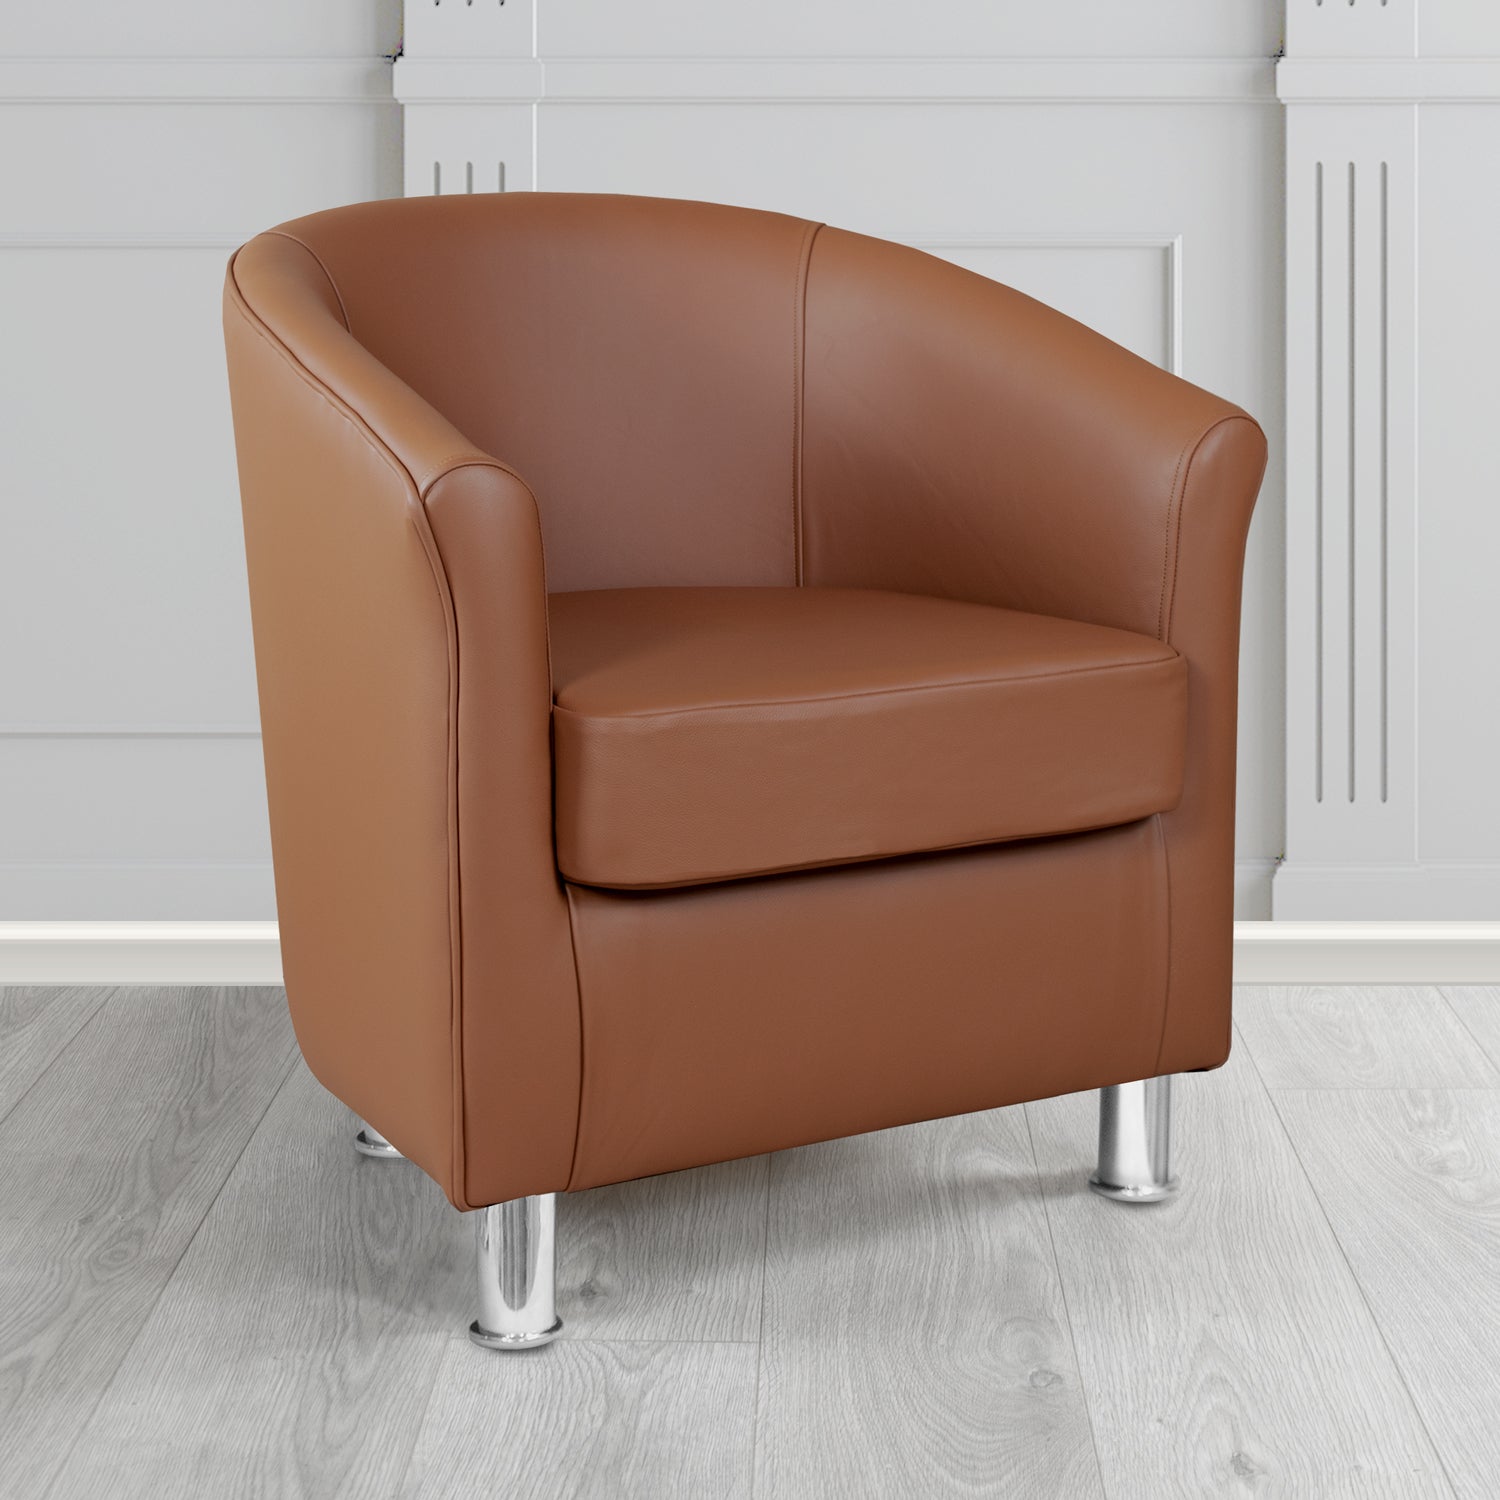 Como Maximo Latte MAX3391 Antimicrobial Crib 5 Contract Faux Leather Tub Chair